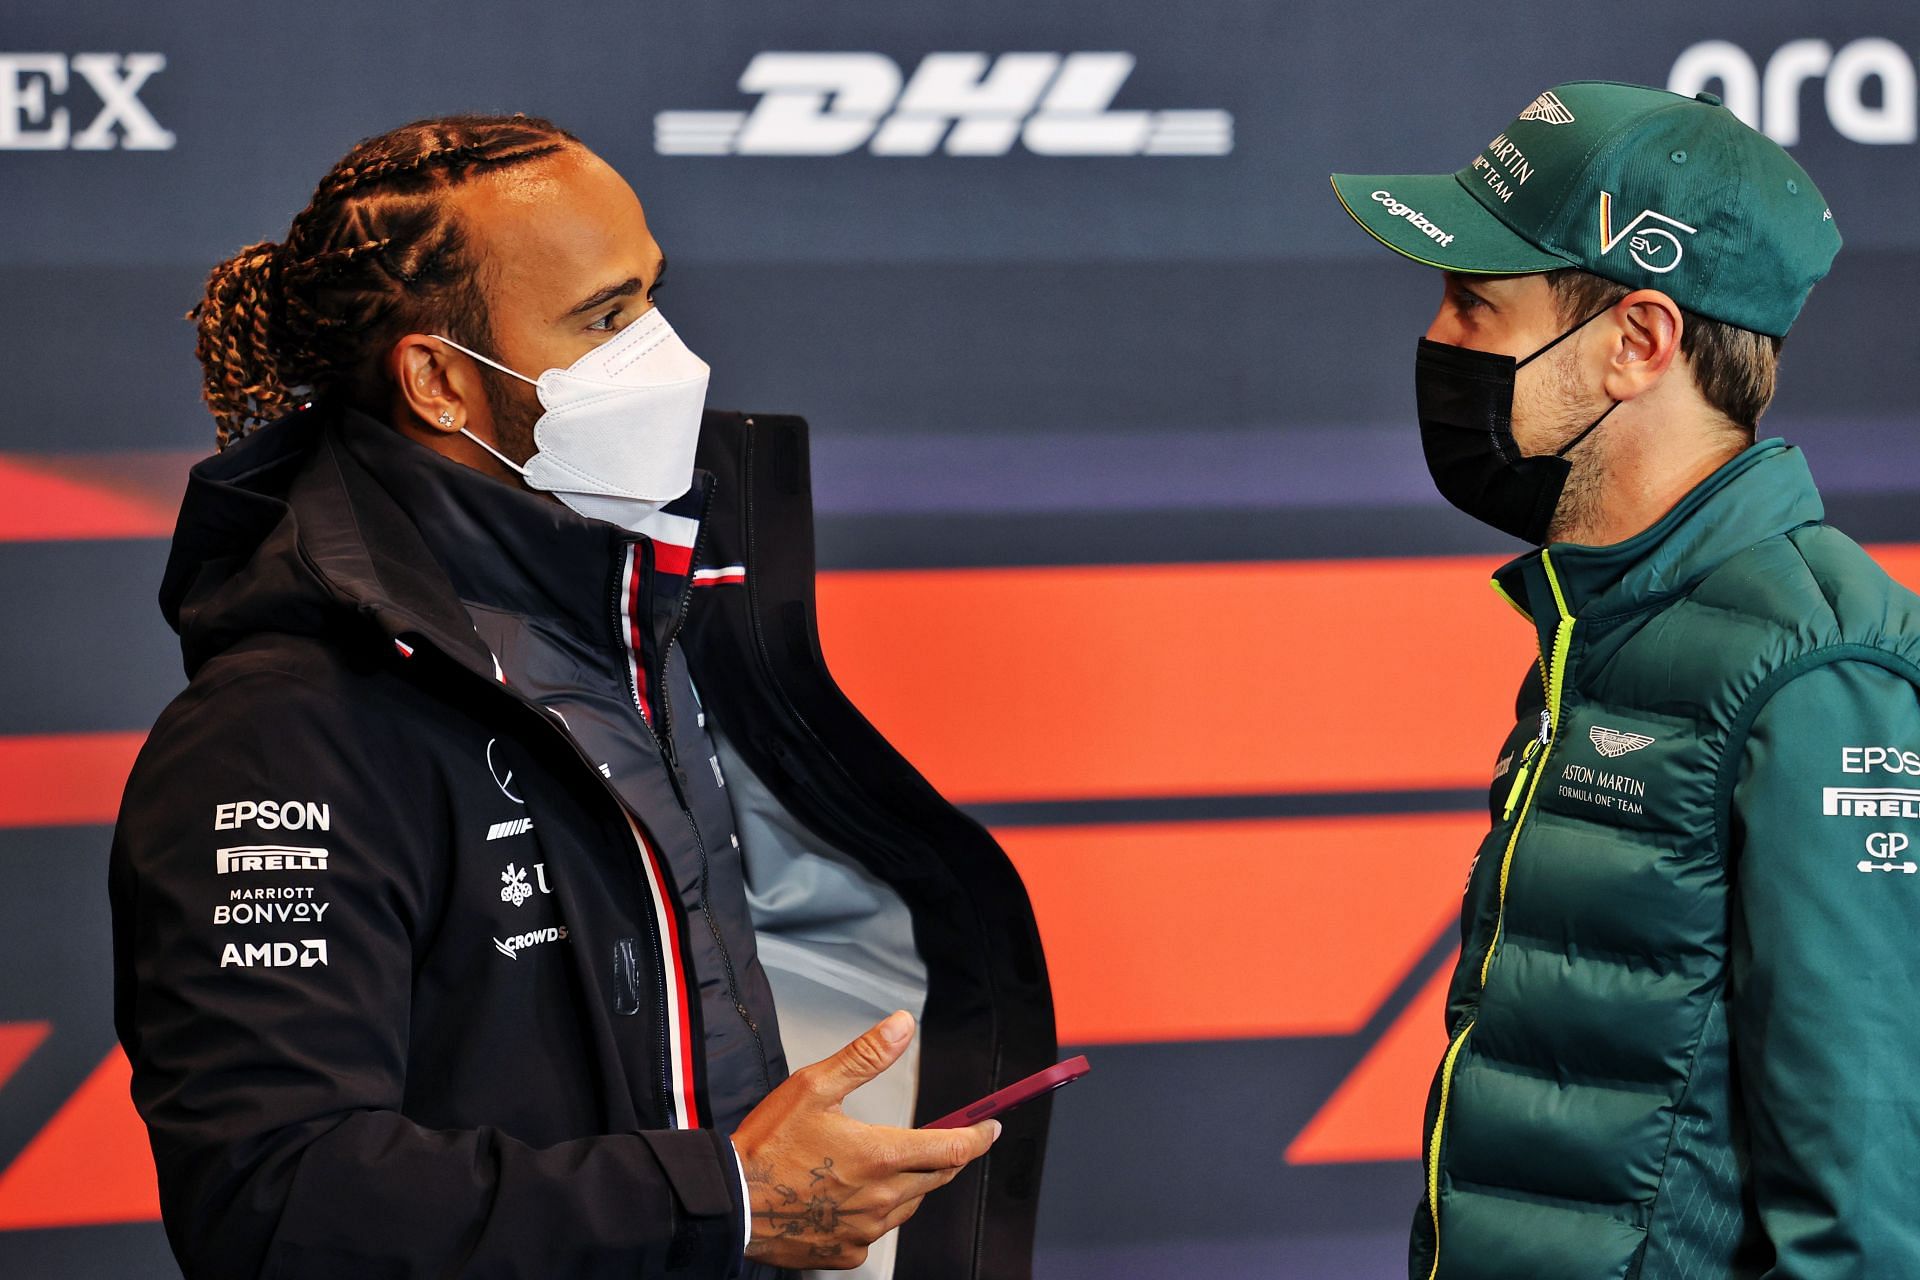 Lewis Hamilton (left) talks with Sebastian Vettel (right) in a Drivers&#039; Press Conference during previews ahead of the F1 Grand Prix of Emilia Romagna at Autodromo Enzo e Dino Ferrari on April 15, 2021, in Imola, Italy (Photo by Laurent Charniaux - Pool/Getty Images)